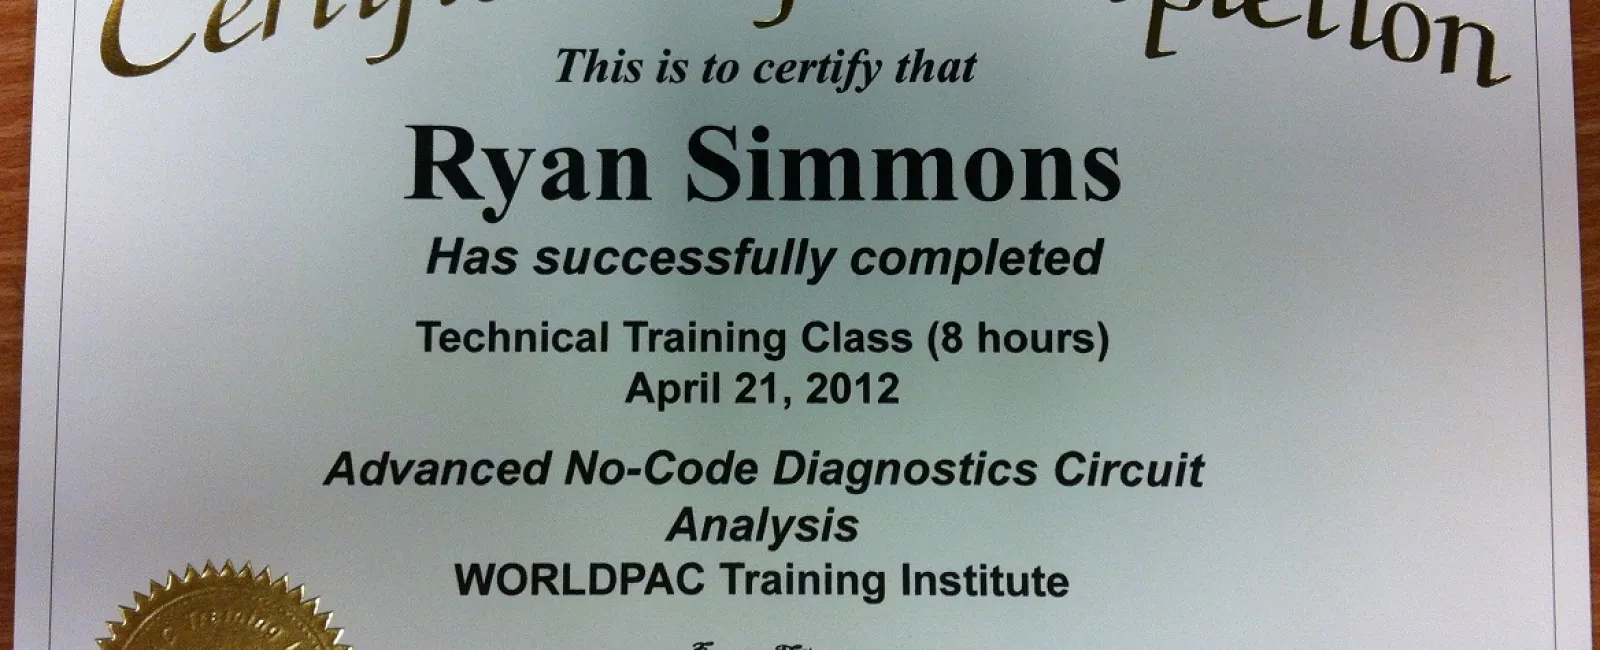 certificate of completion for Ryan Simmons